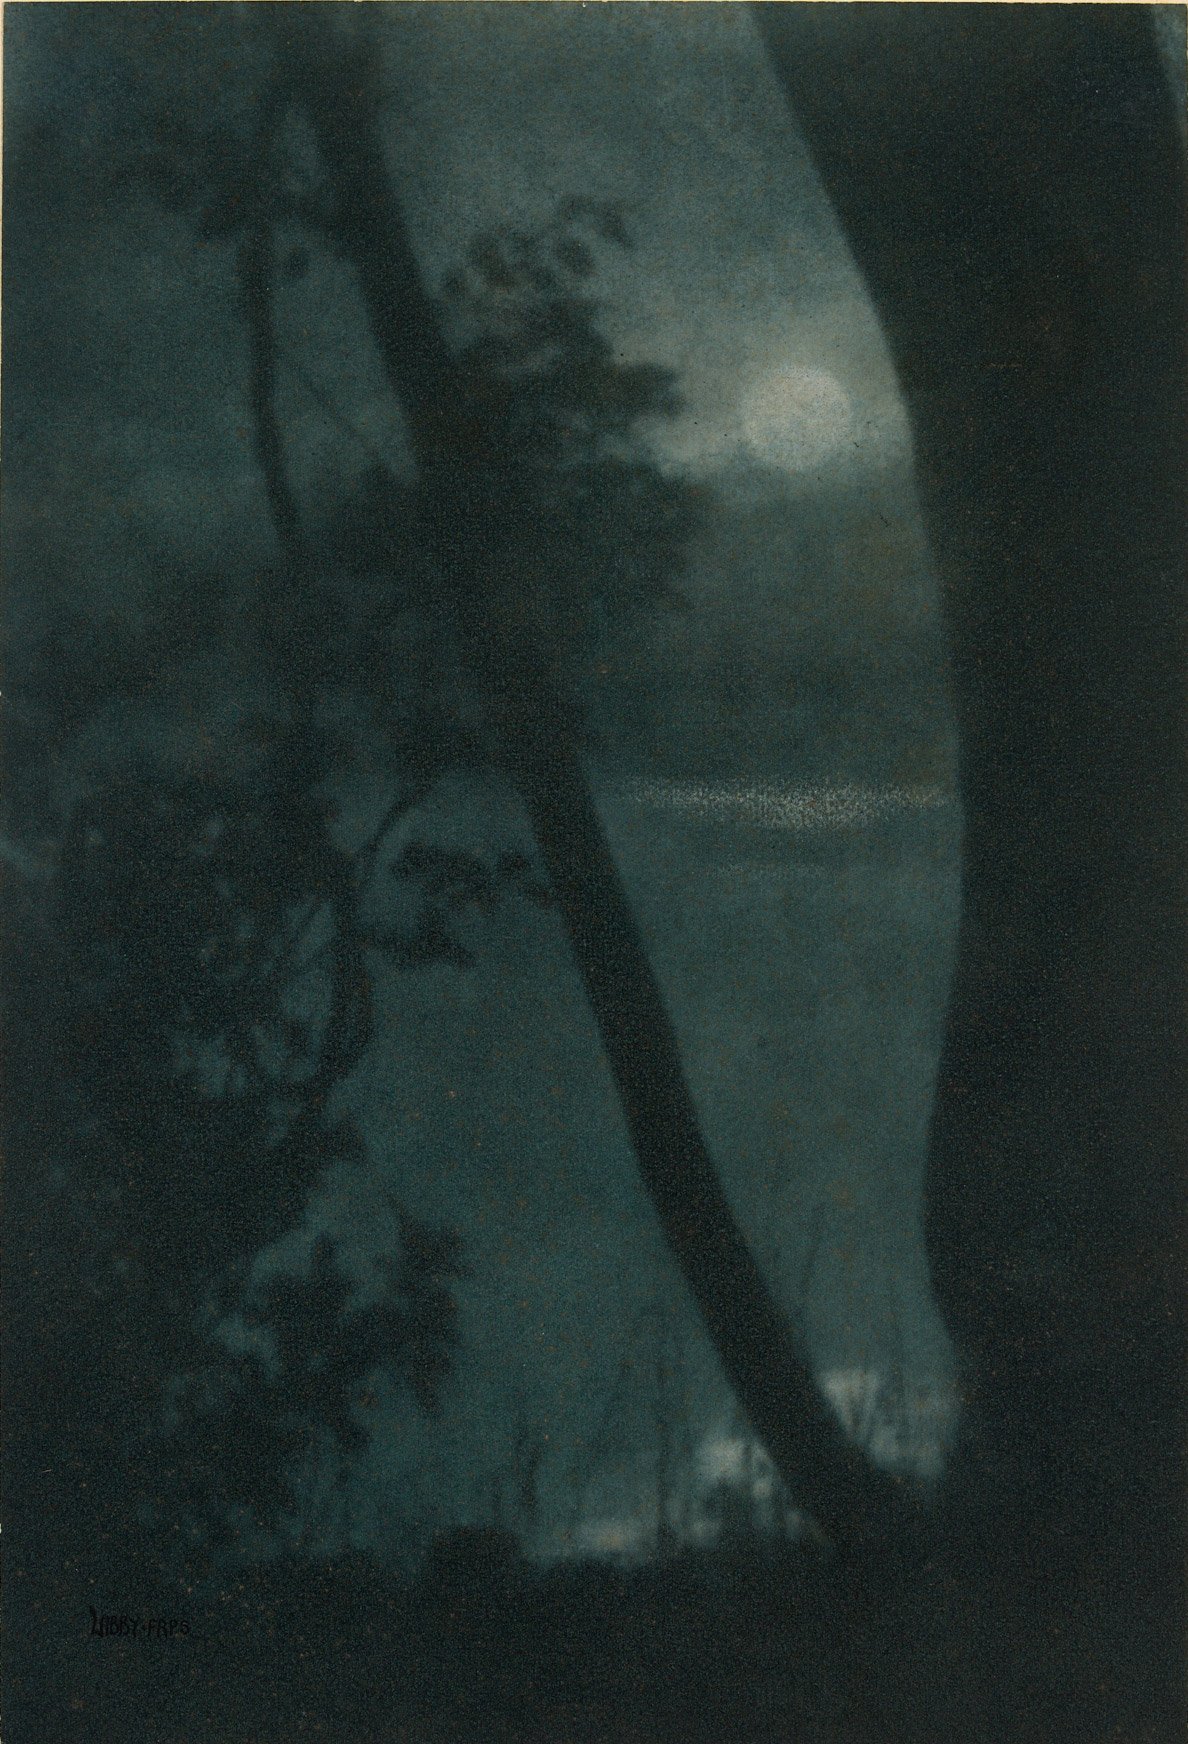   Francis Orville Libby  United States, 1883–1961  Moonrise , circa 1922 gum bichromate print, 16 5/8 x 11 1/4 inches Promised Gift from the Judy Glickman Lauder Collection, 6.2004.1 